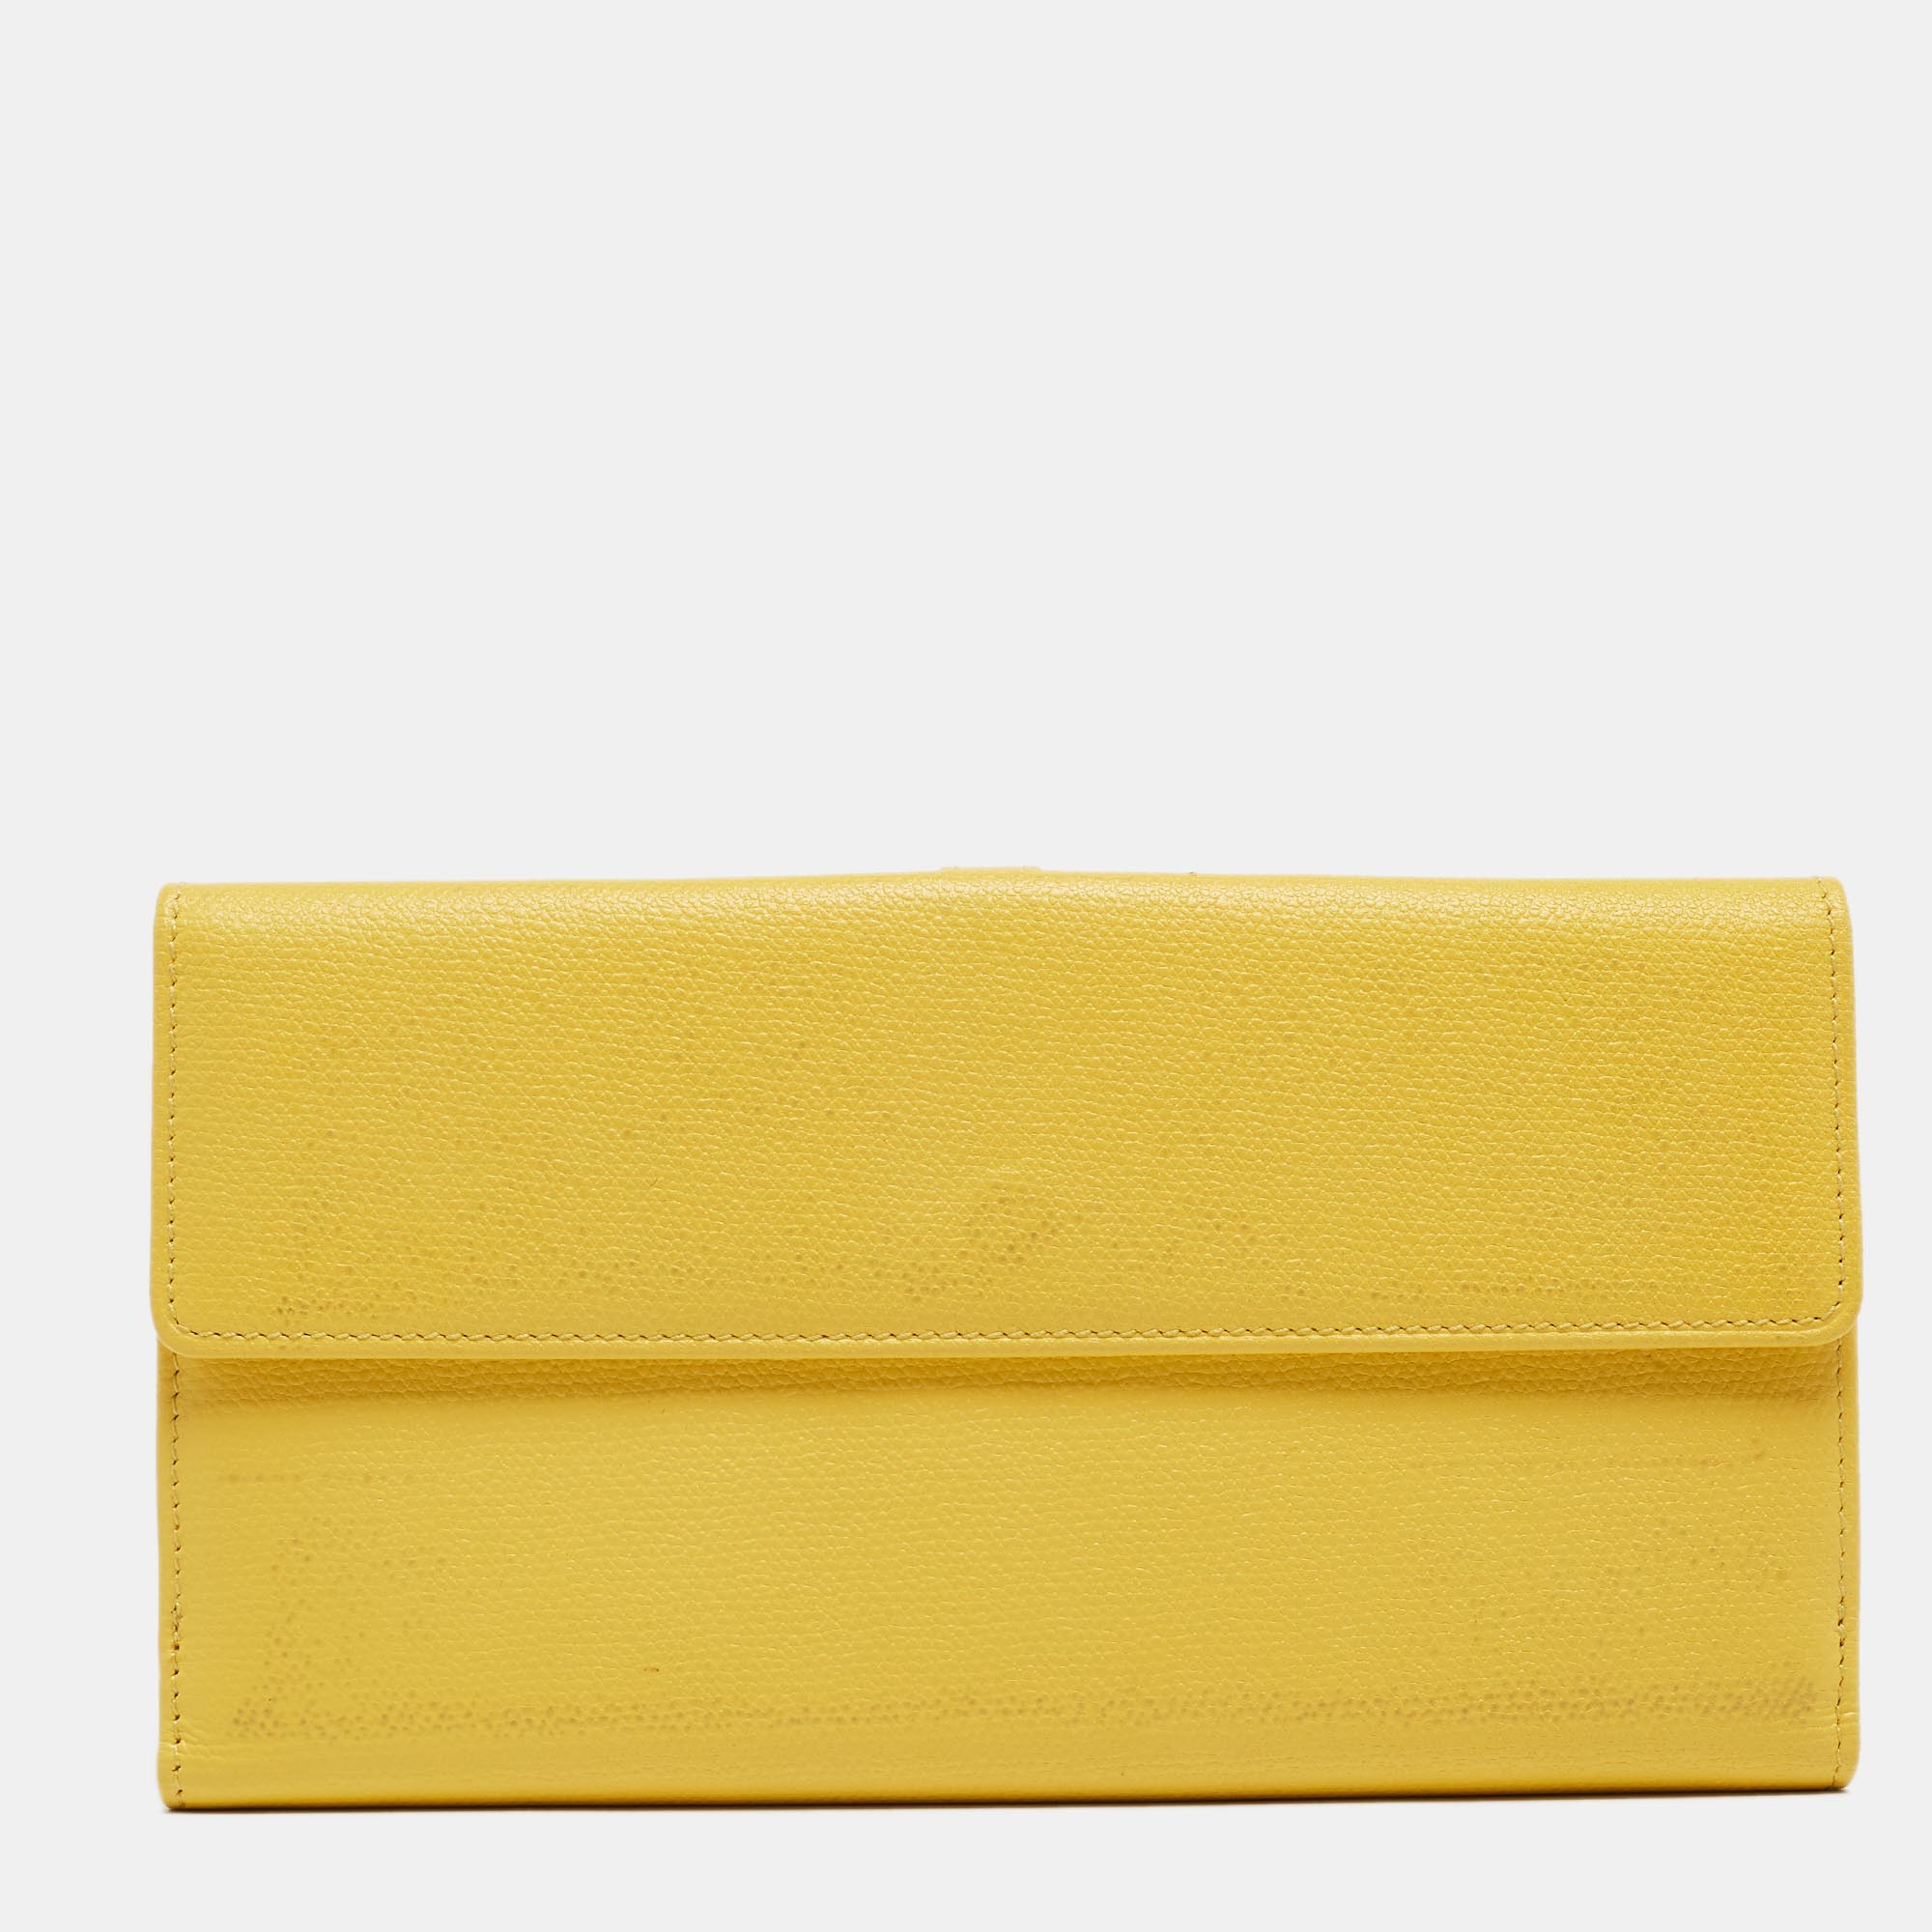 Chanel Yellow Leather CC Flap French Continental Wallet